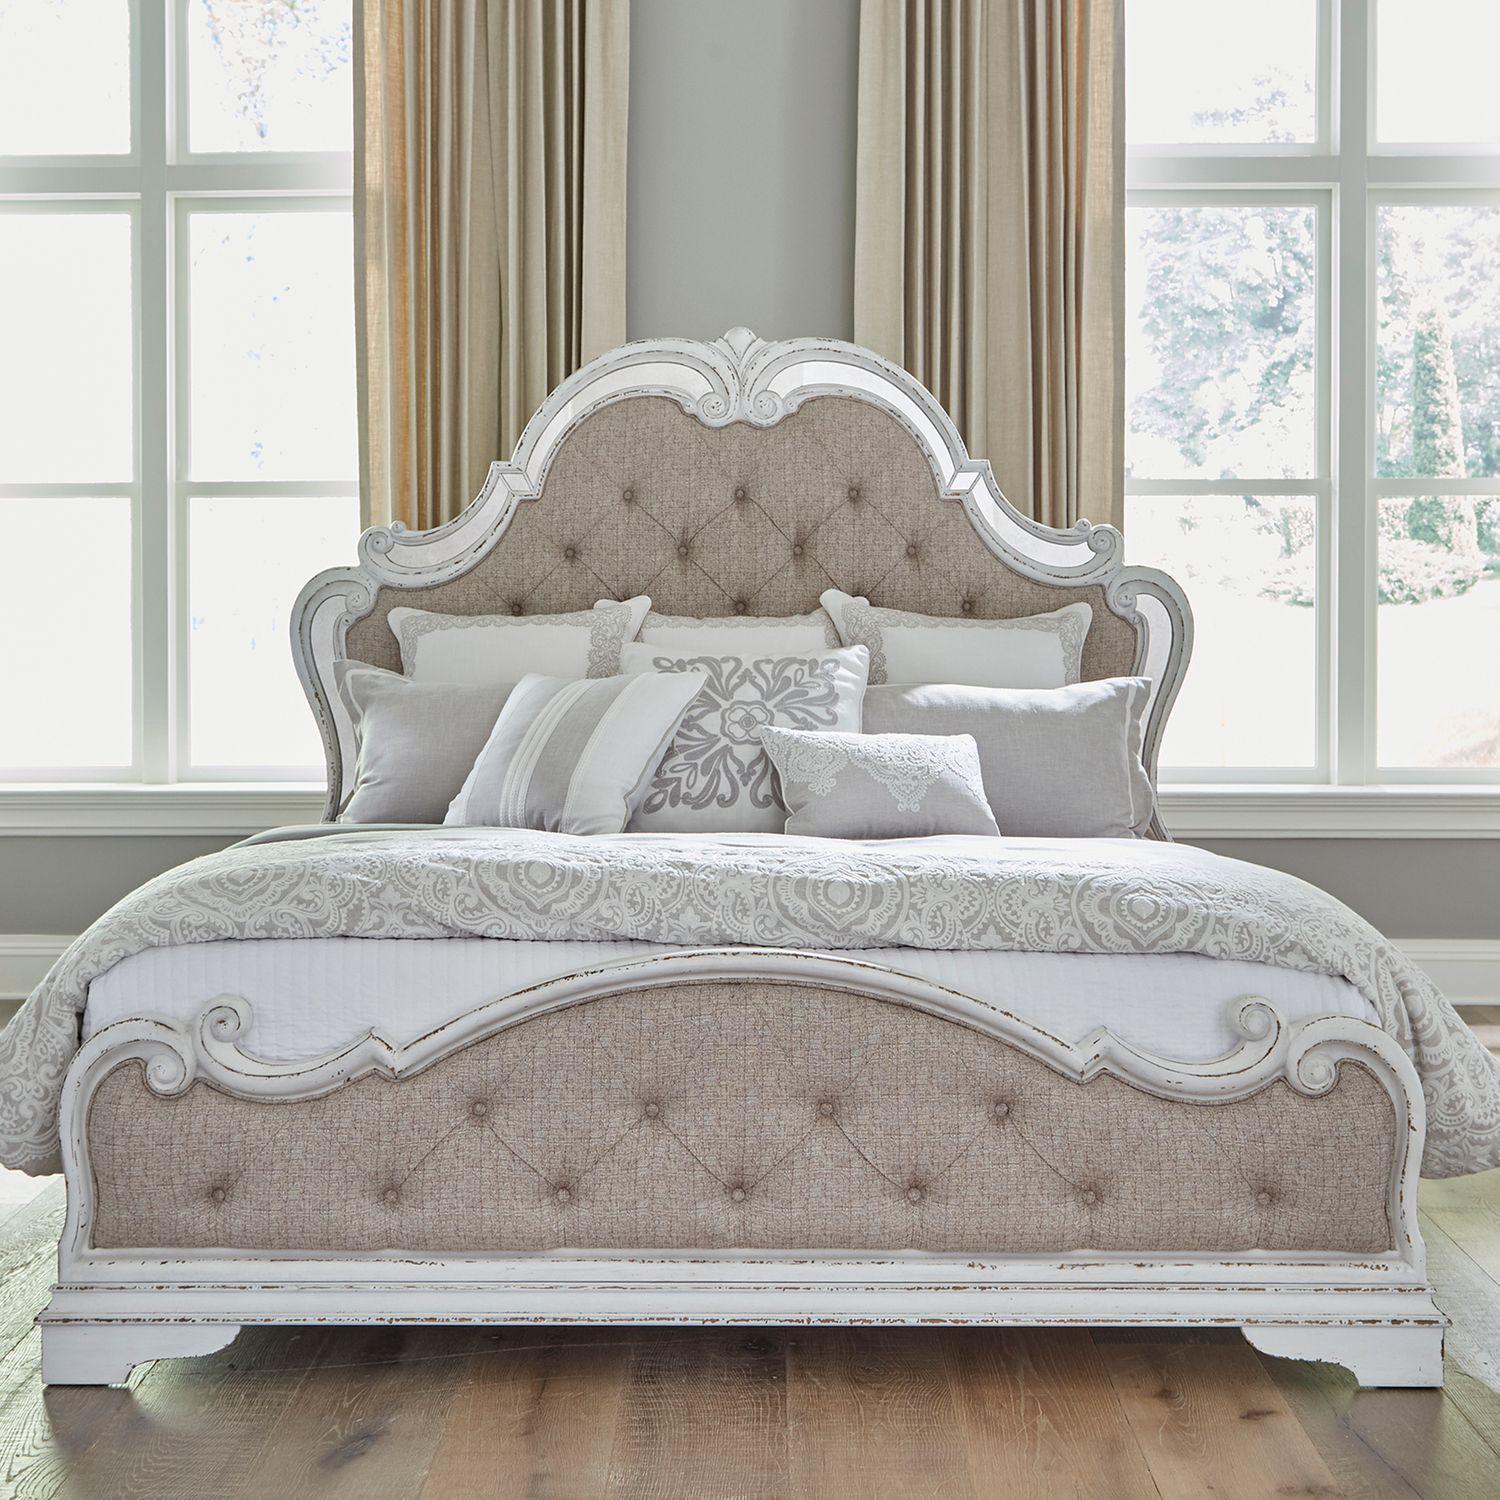 European Traditional Platform Bed Magnolia Manor  (244-BR) Mirrored Bed 244-BR-OQUB in White Chenille